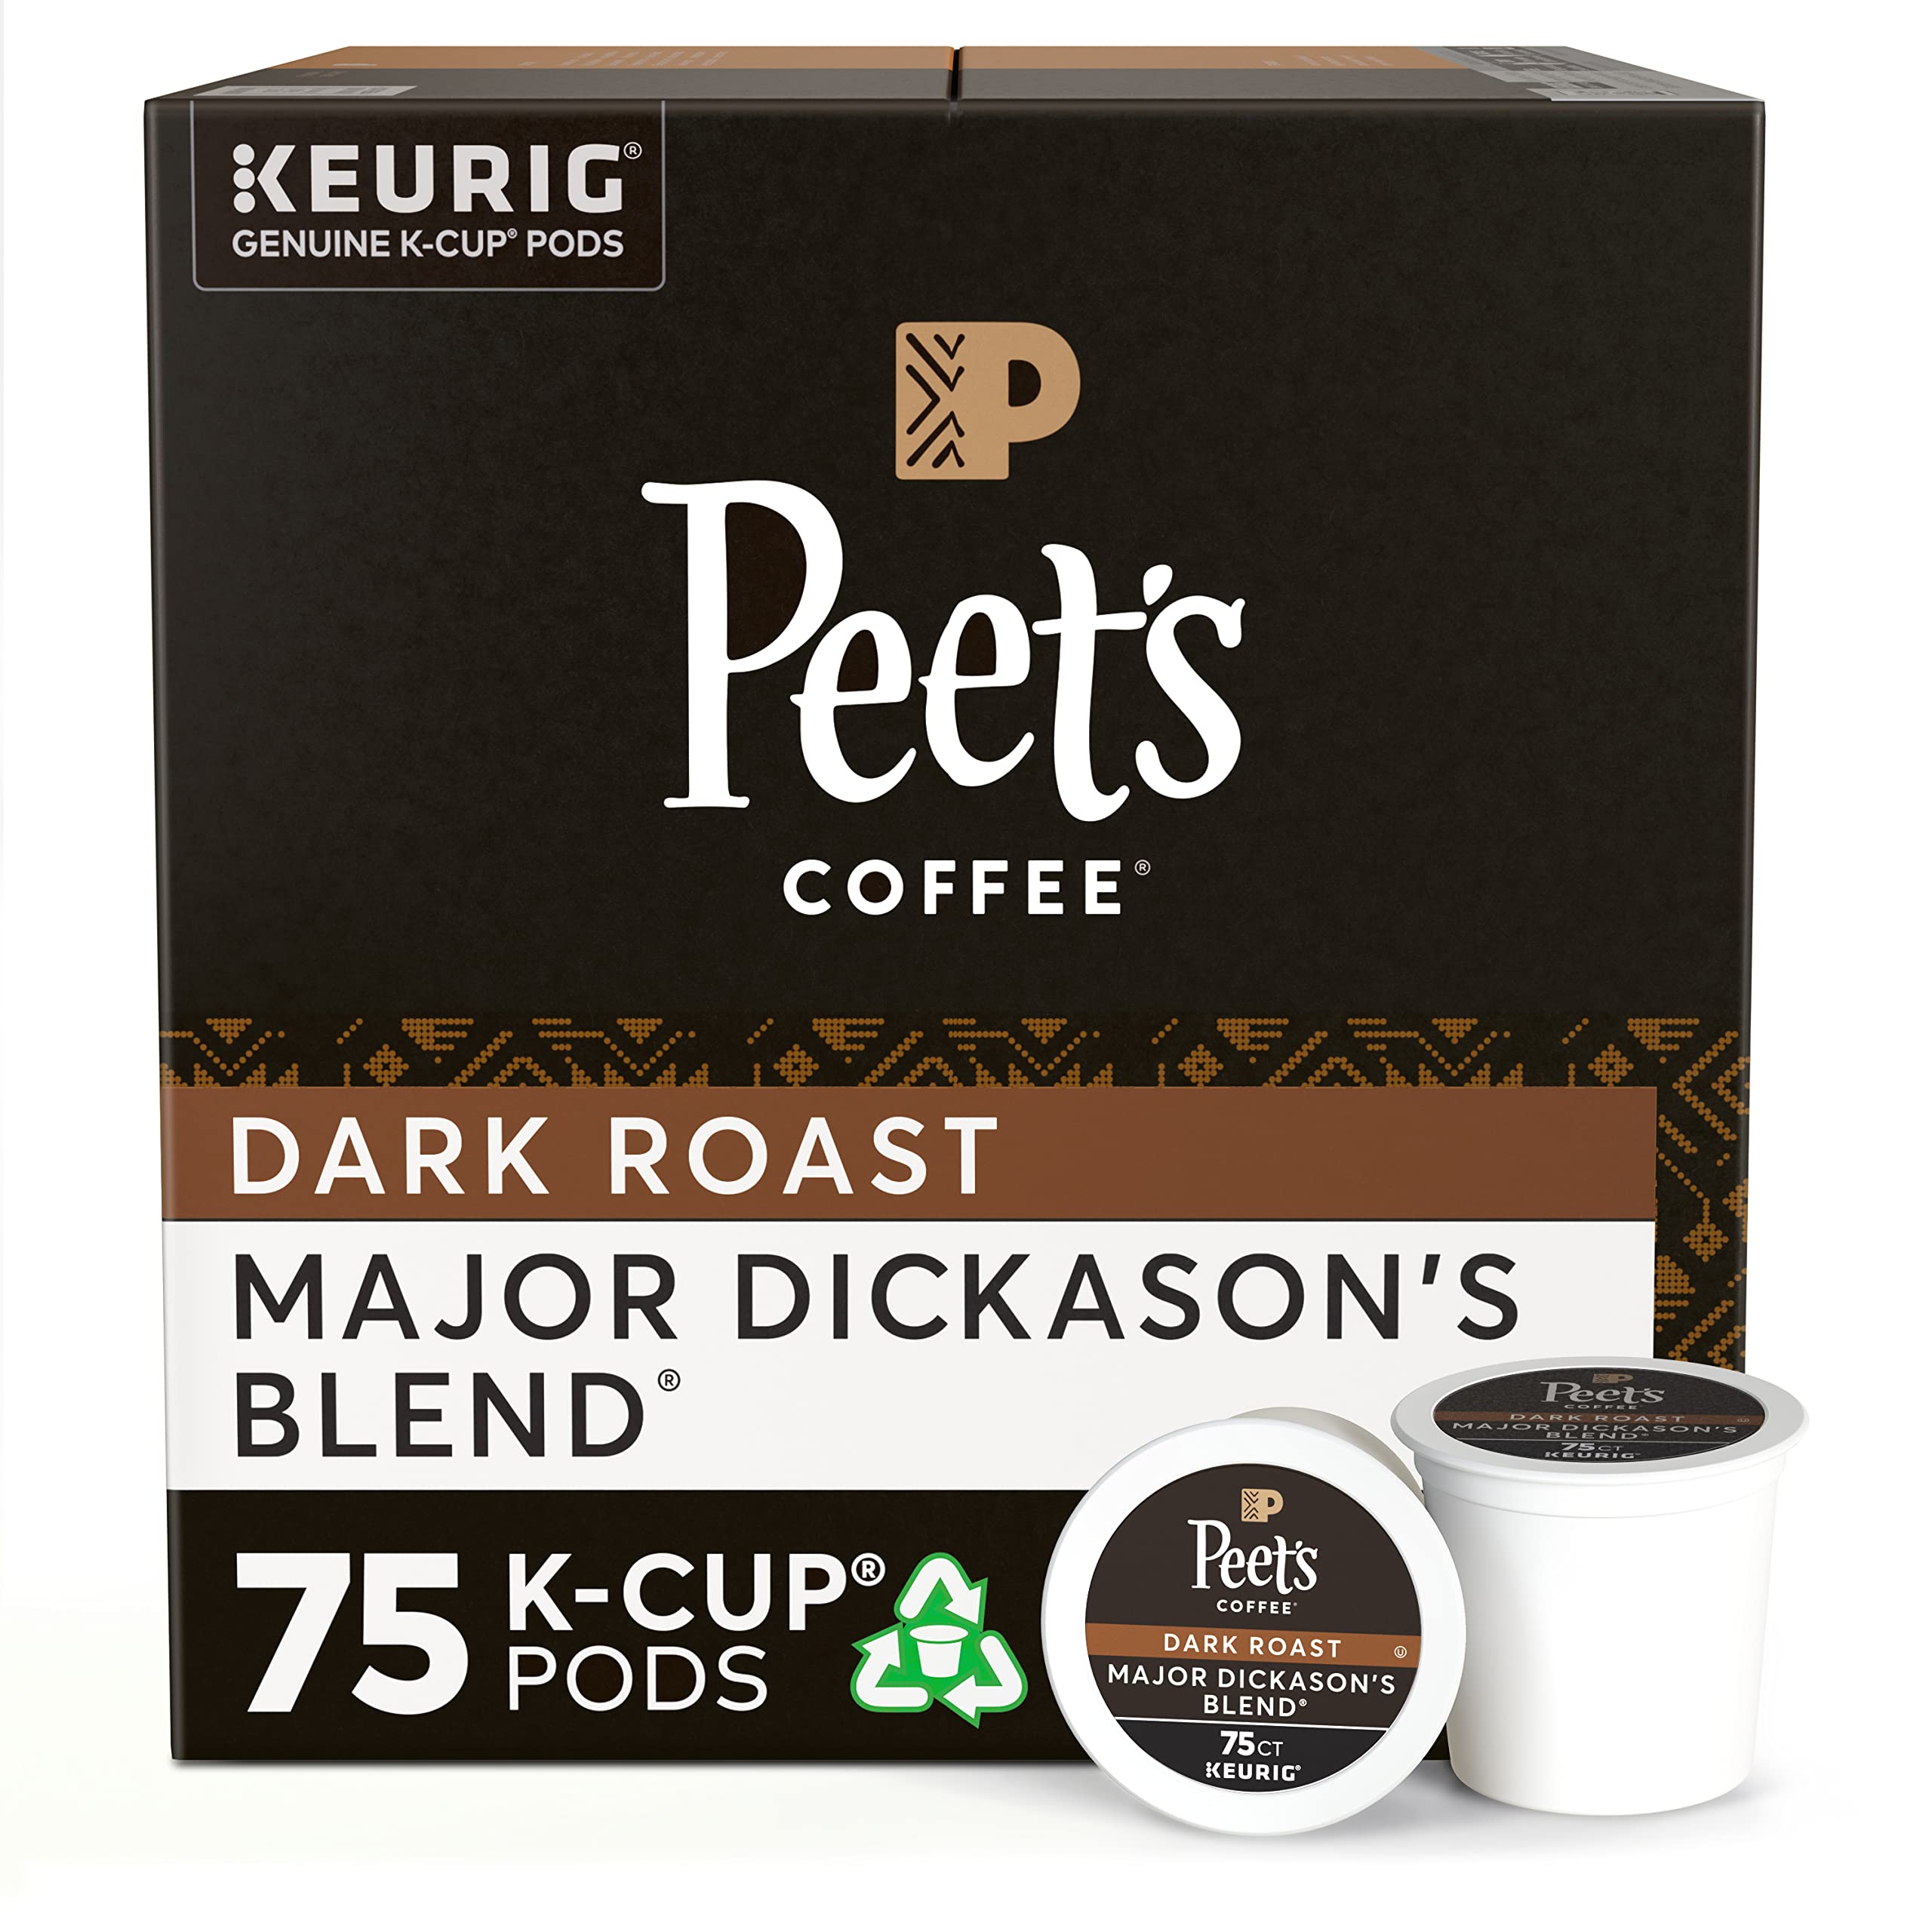 Peet's Coffee, Dark Roast K-Cup Pods for Keurig Brewers - Major Dickason's Blend 75 Count (1 Box of 75 K-Cup Pods), 15% S&S = $26.34